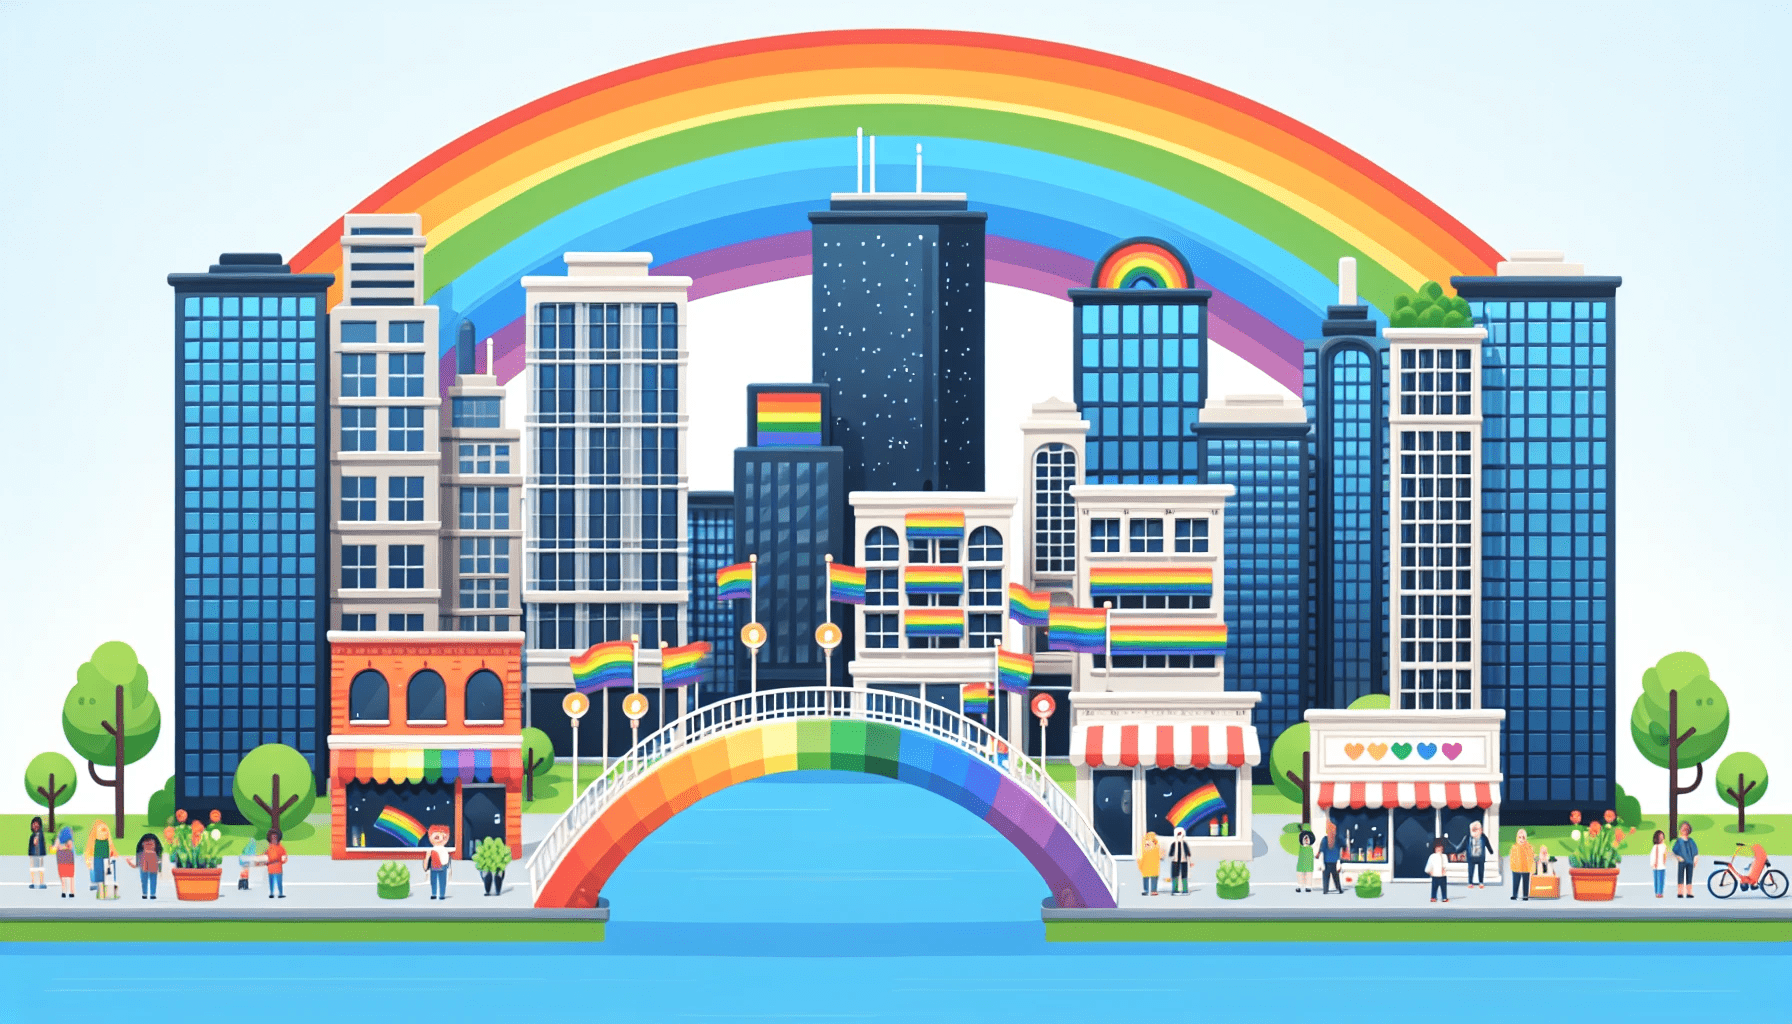 Illustration representing supplier diversity and inclusion promoted by Canadian LGBTQ Chamber of Commerce